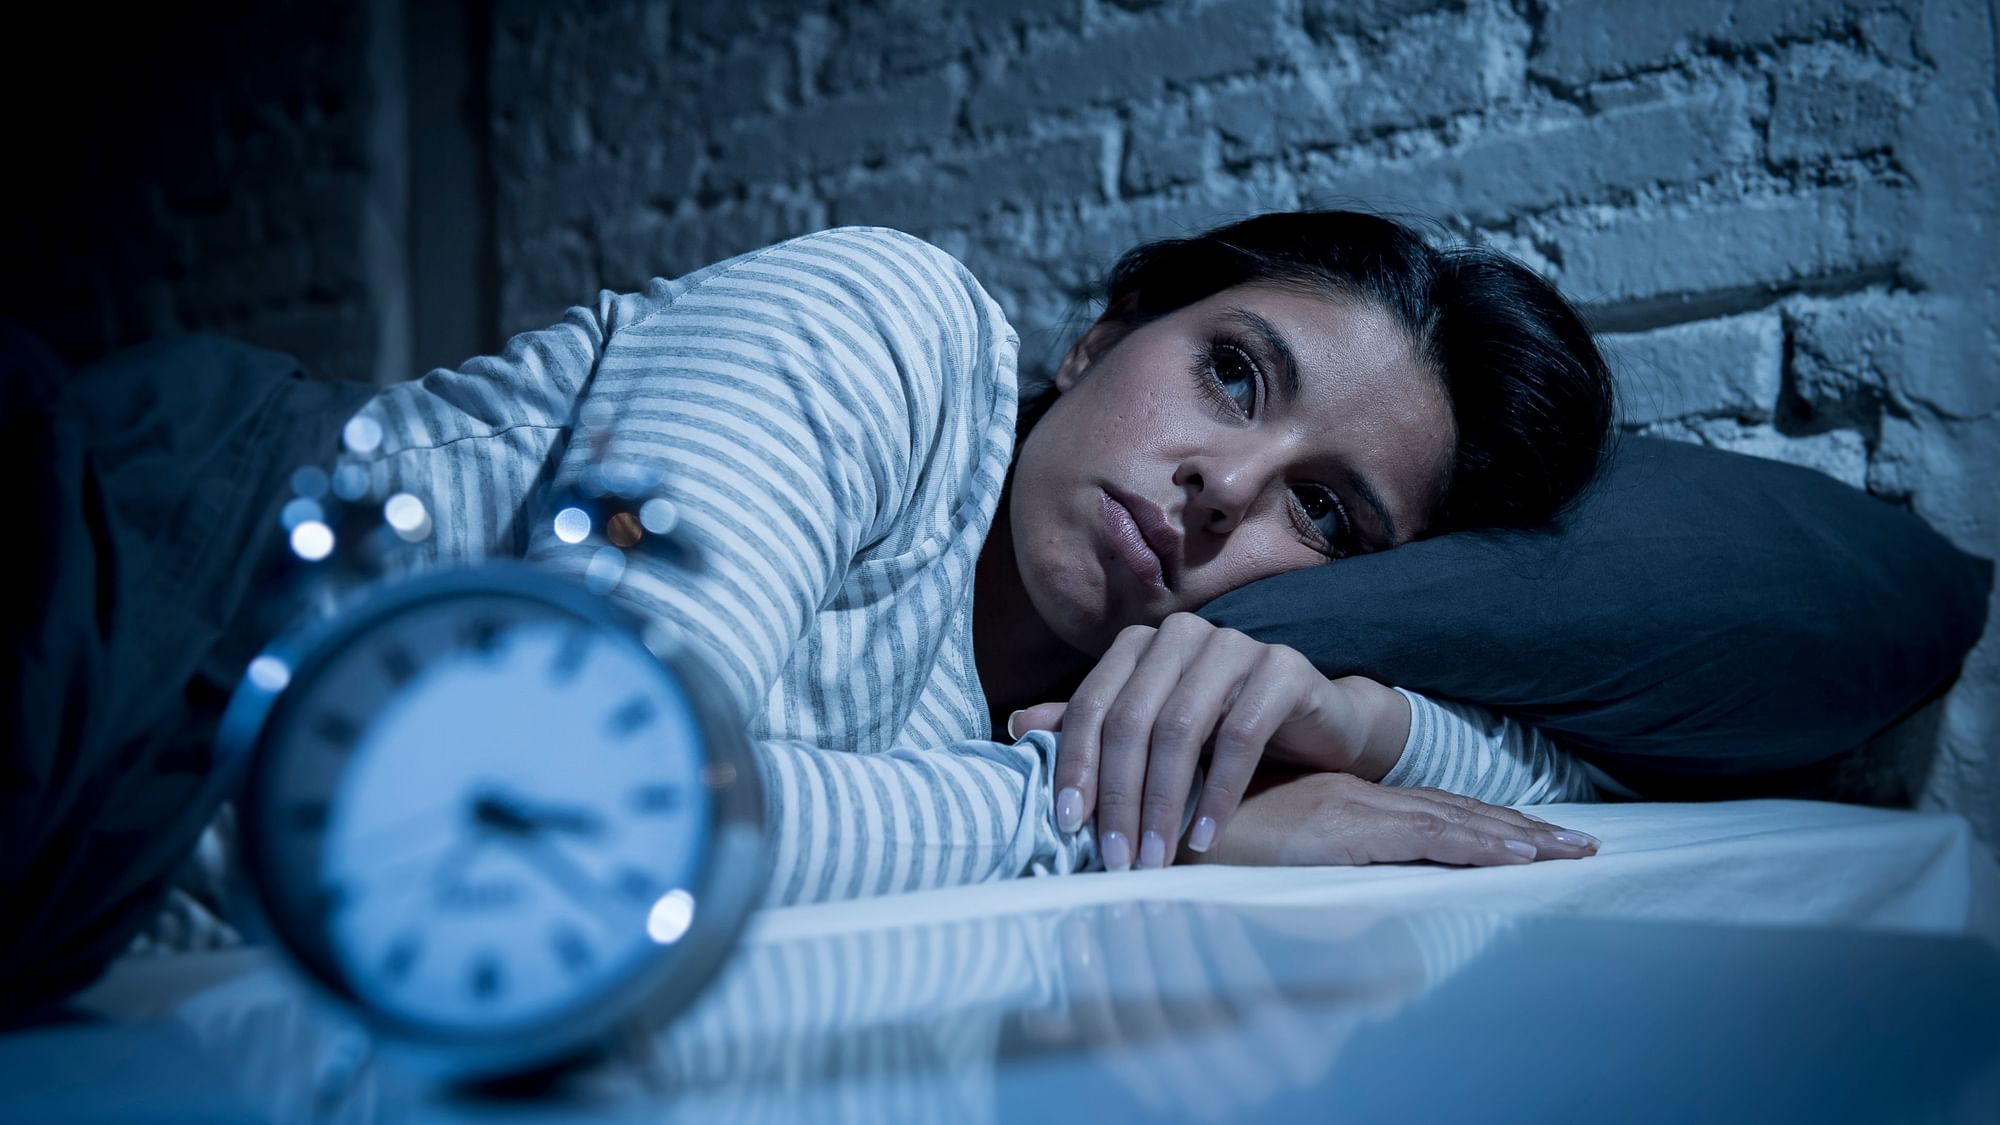 Variation in sleep can increase the risk of lung diseases